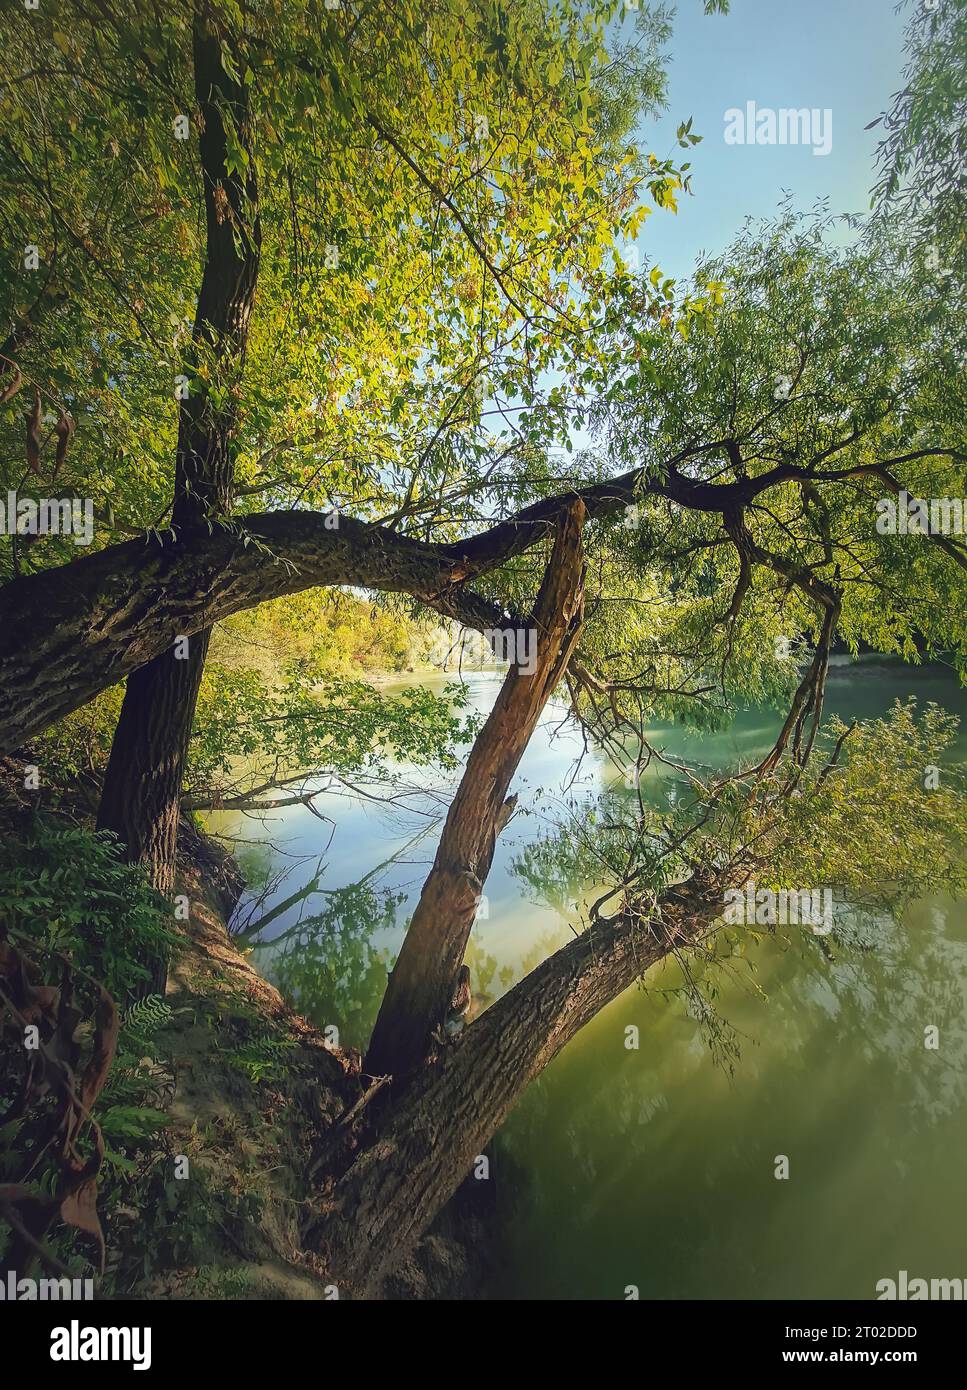 Wild nature view with willow trees growing above the water on the Prut riverbank Stock Photo